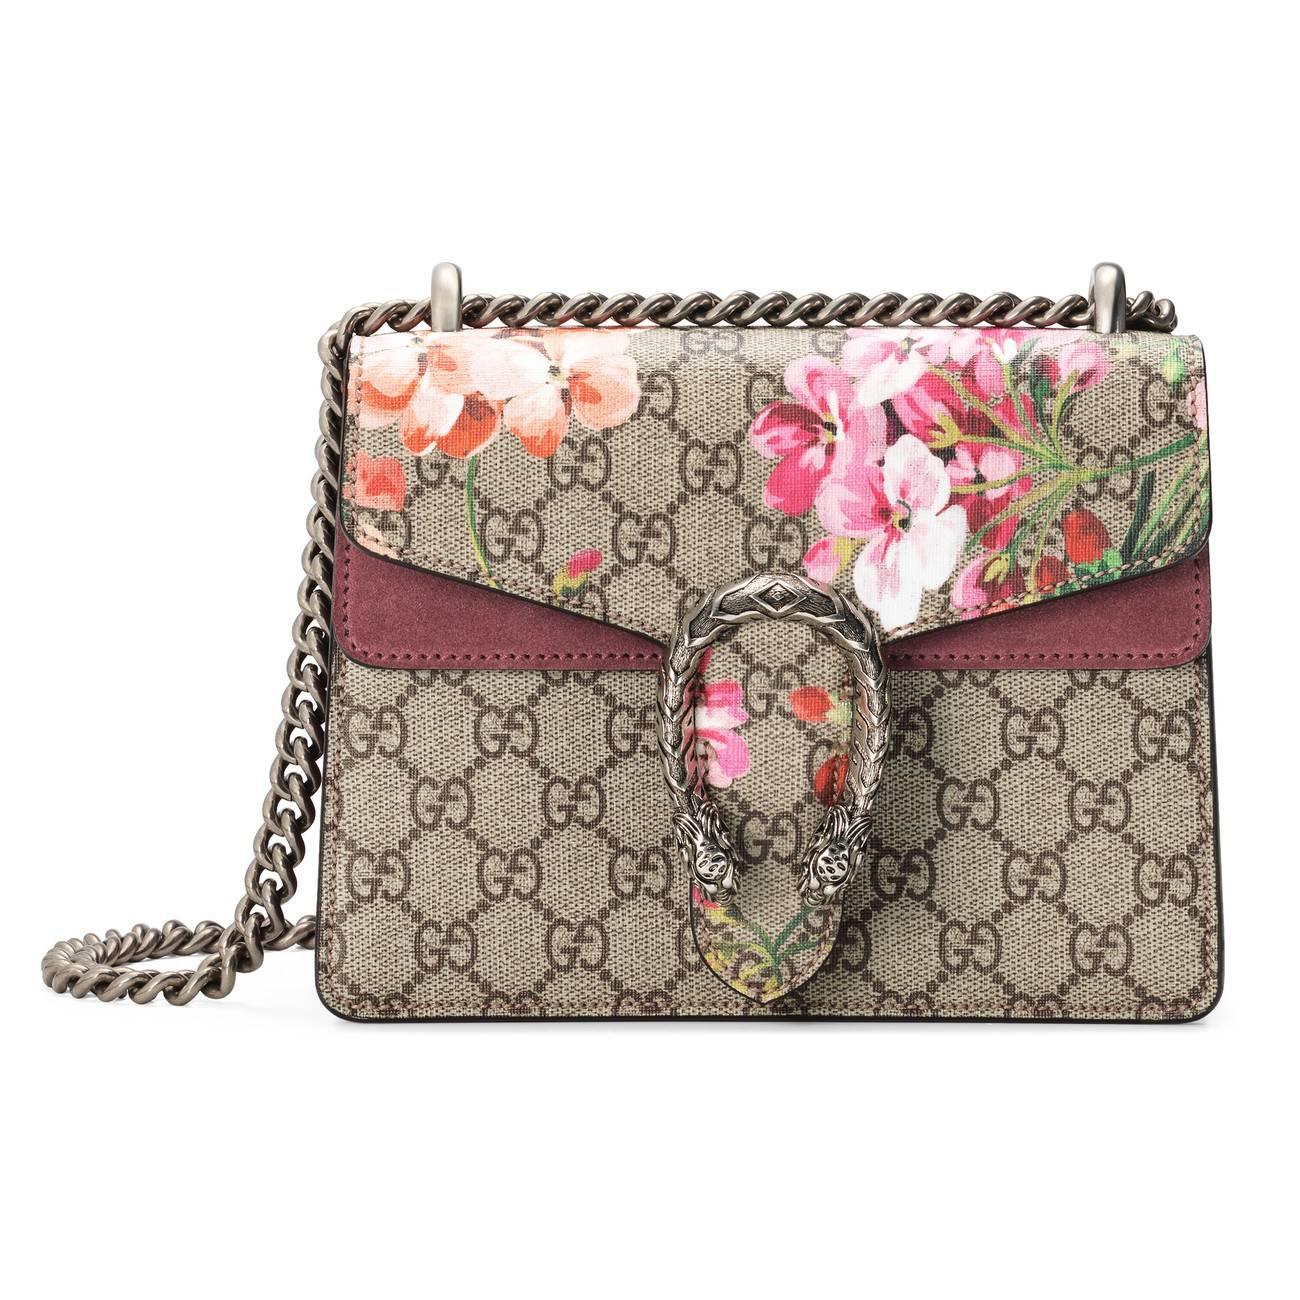 Gucci 2016 Re-edition Dionysus GG Blooms Bag in Natural | Lyst